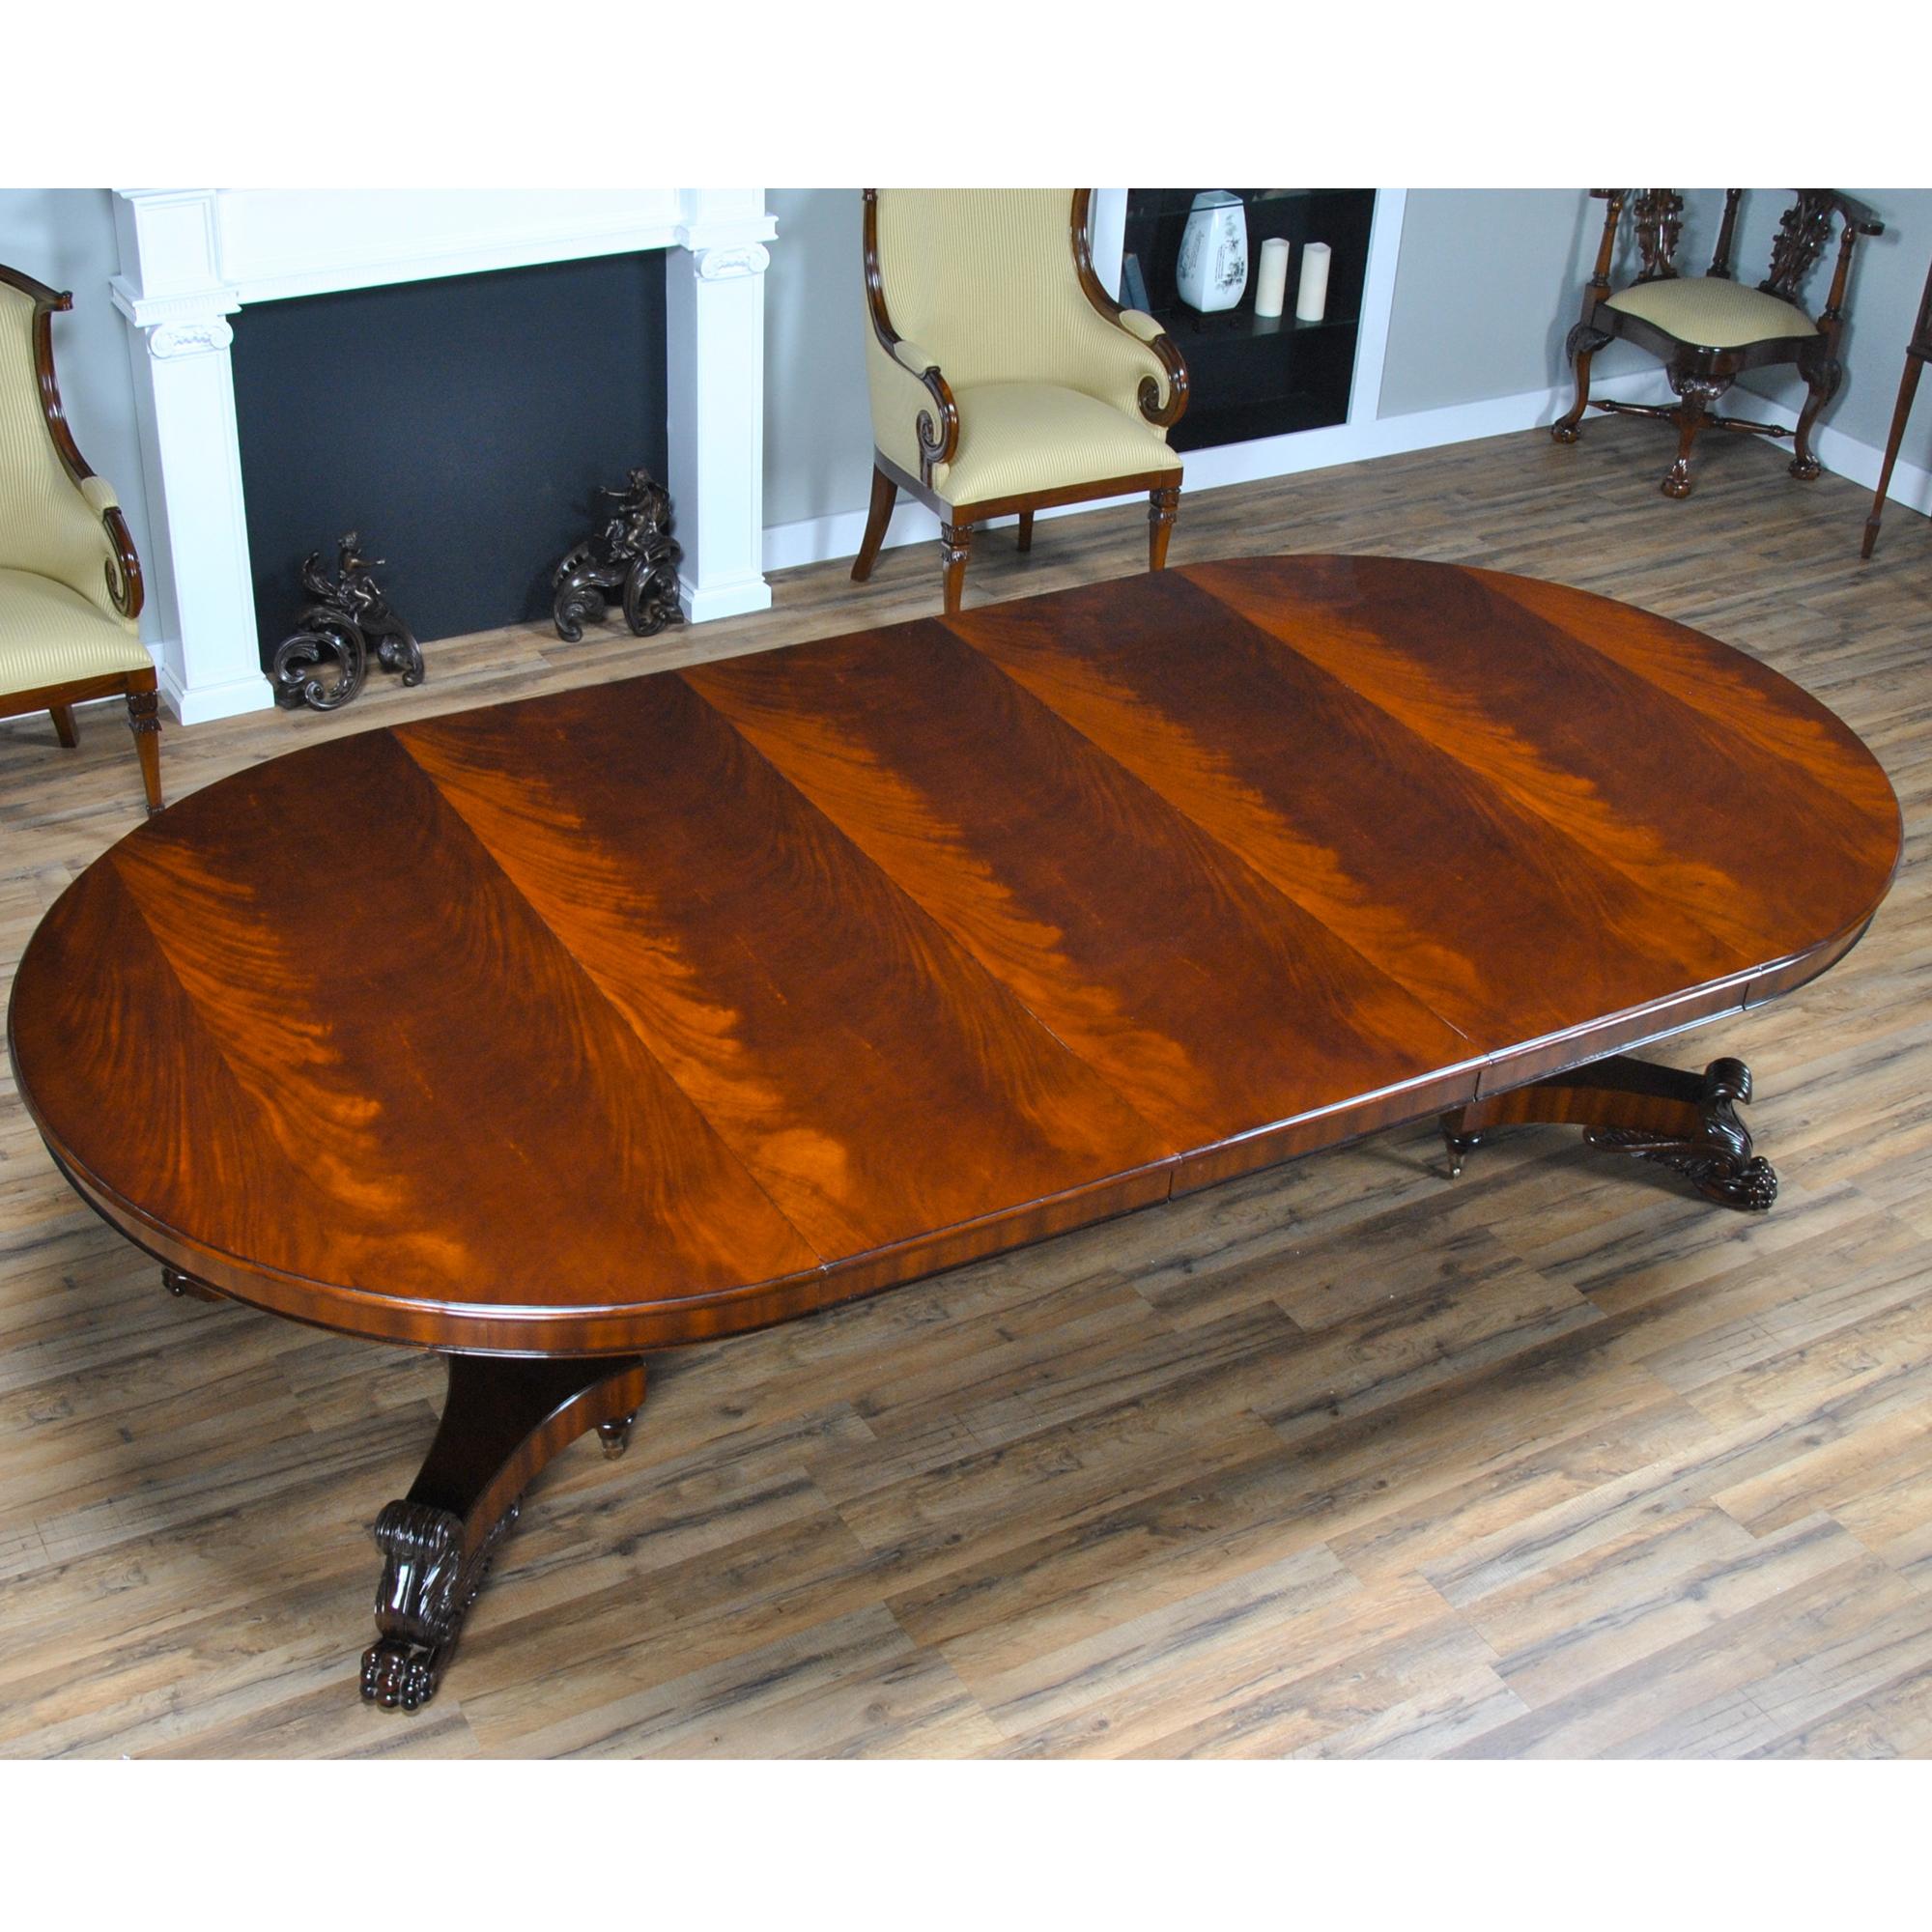 The Round Table with Empire Bases 60-115 inch is a high quality 60 inch round table when closed. The field of the table top being produced from the finest figural mahogany veneers and surrounded with a bull nose shaped molding. Three leaves can be